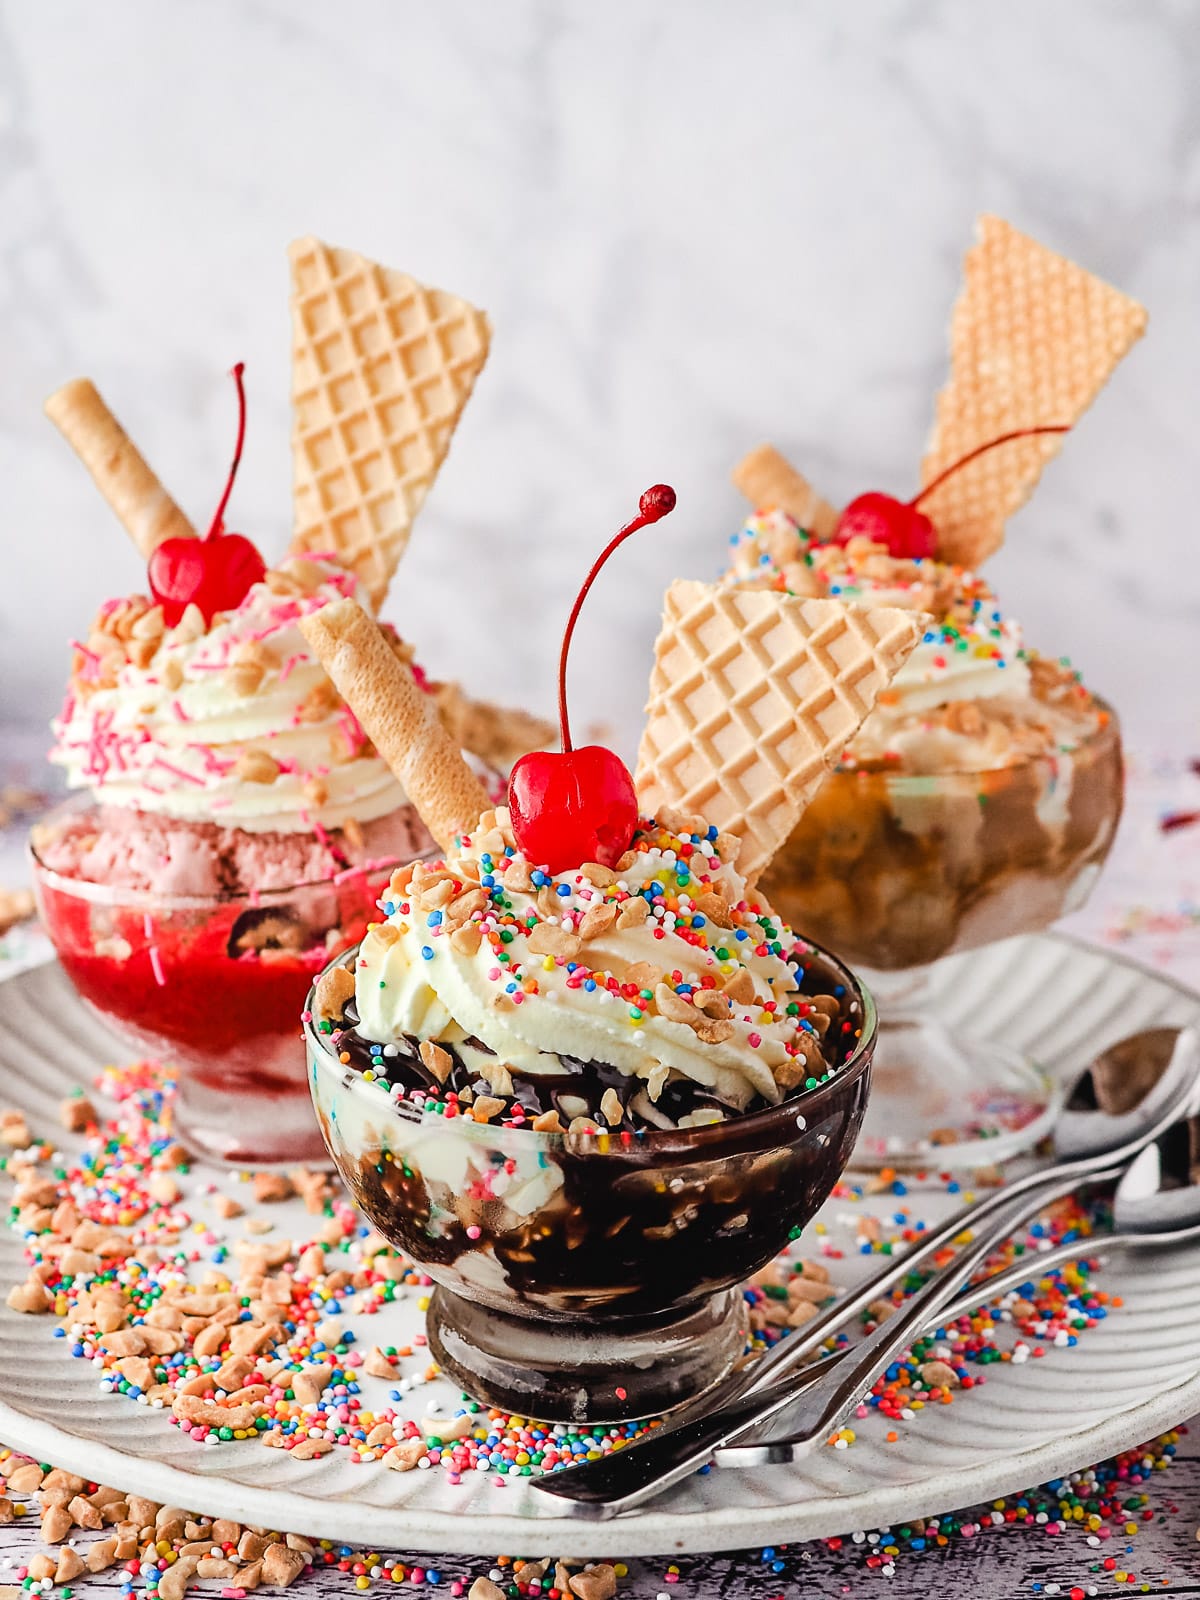 Group of three sundaes, classic, strawberry and caramel, with whipped cream, nuts, sprinkles, wafers and cherry, on a plate with spoons, nuts and sprinkles.